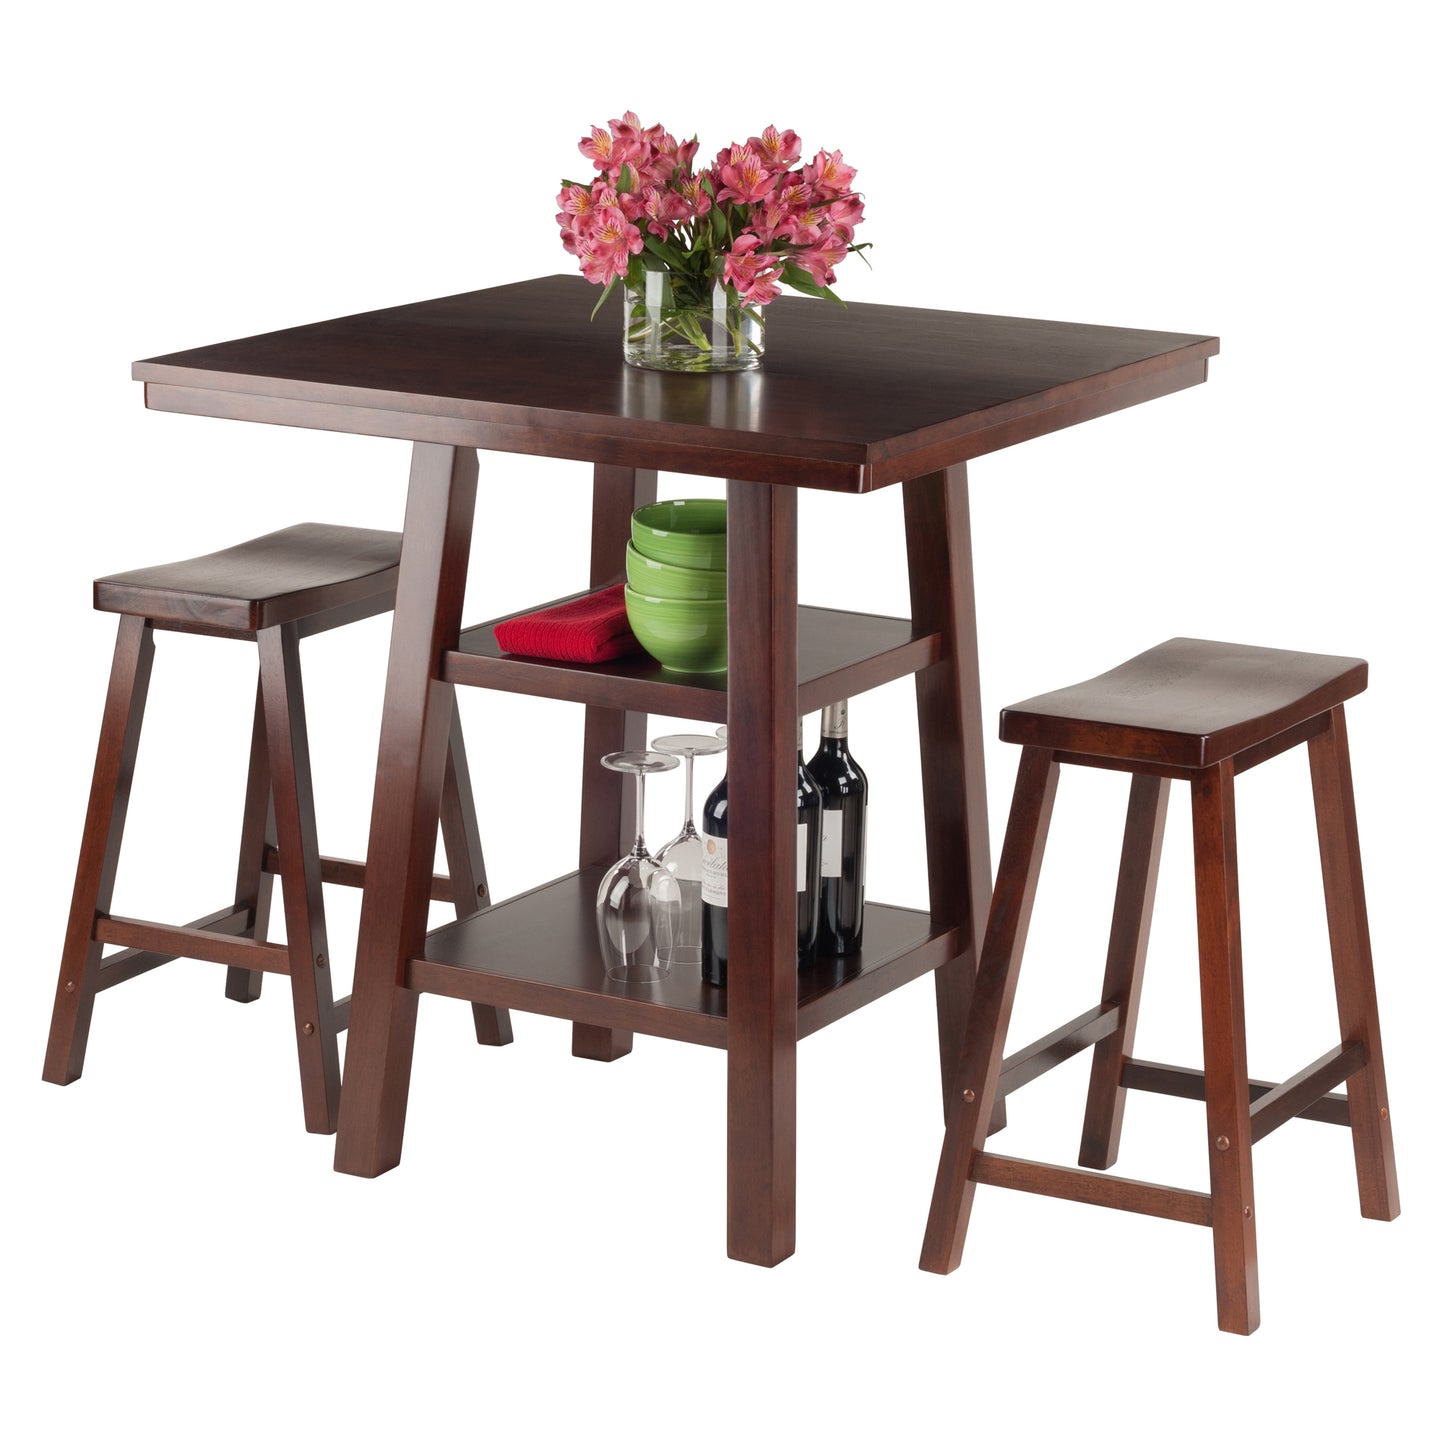 Orlando 3-Pc High Table with Saddle Seat Counter Stools, Walnut